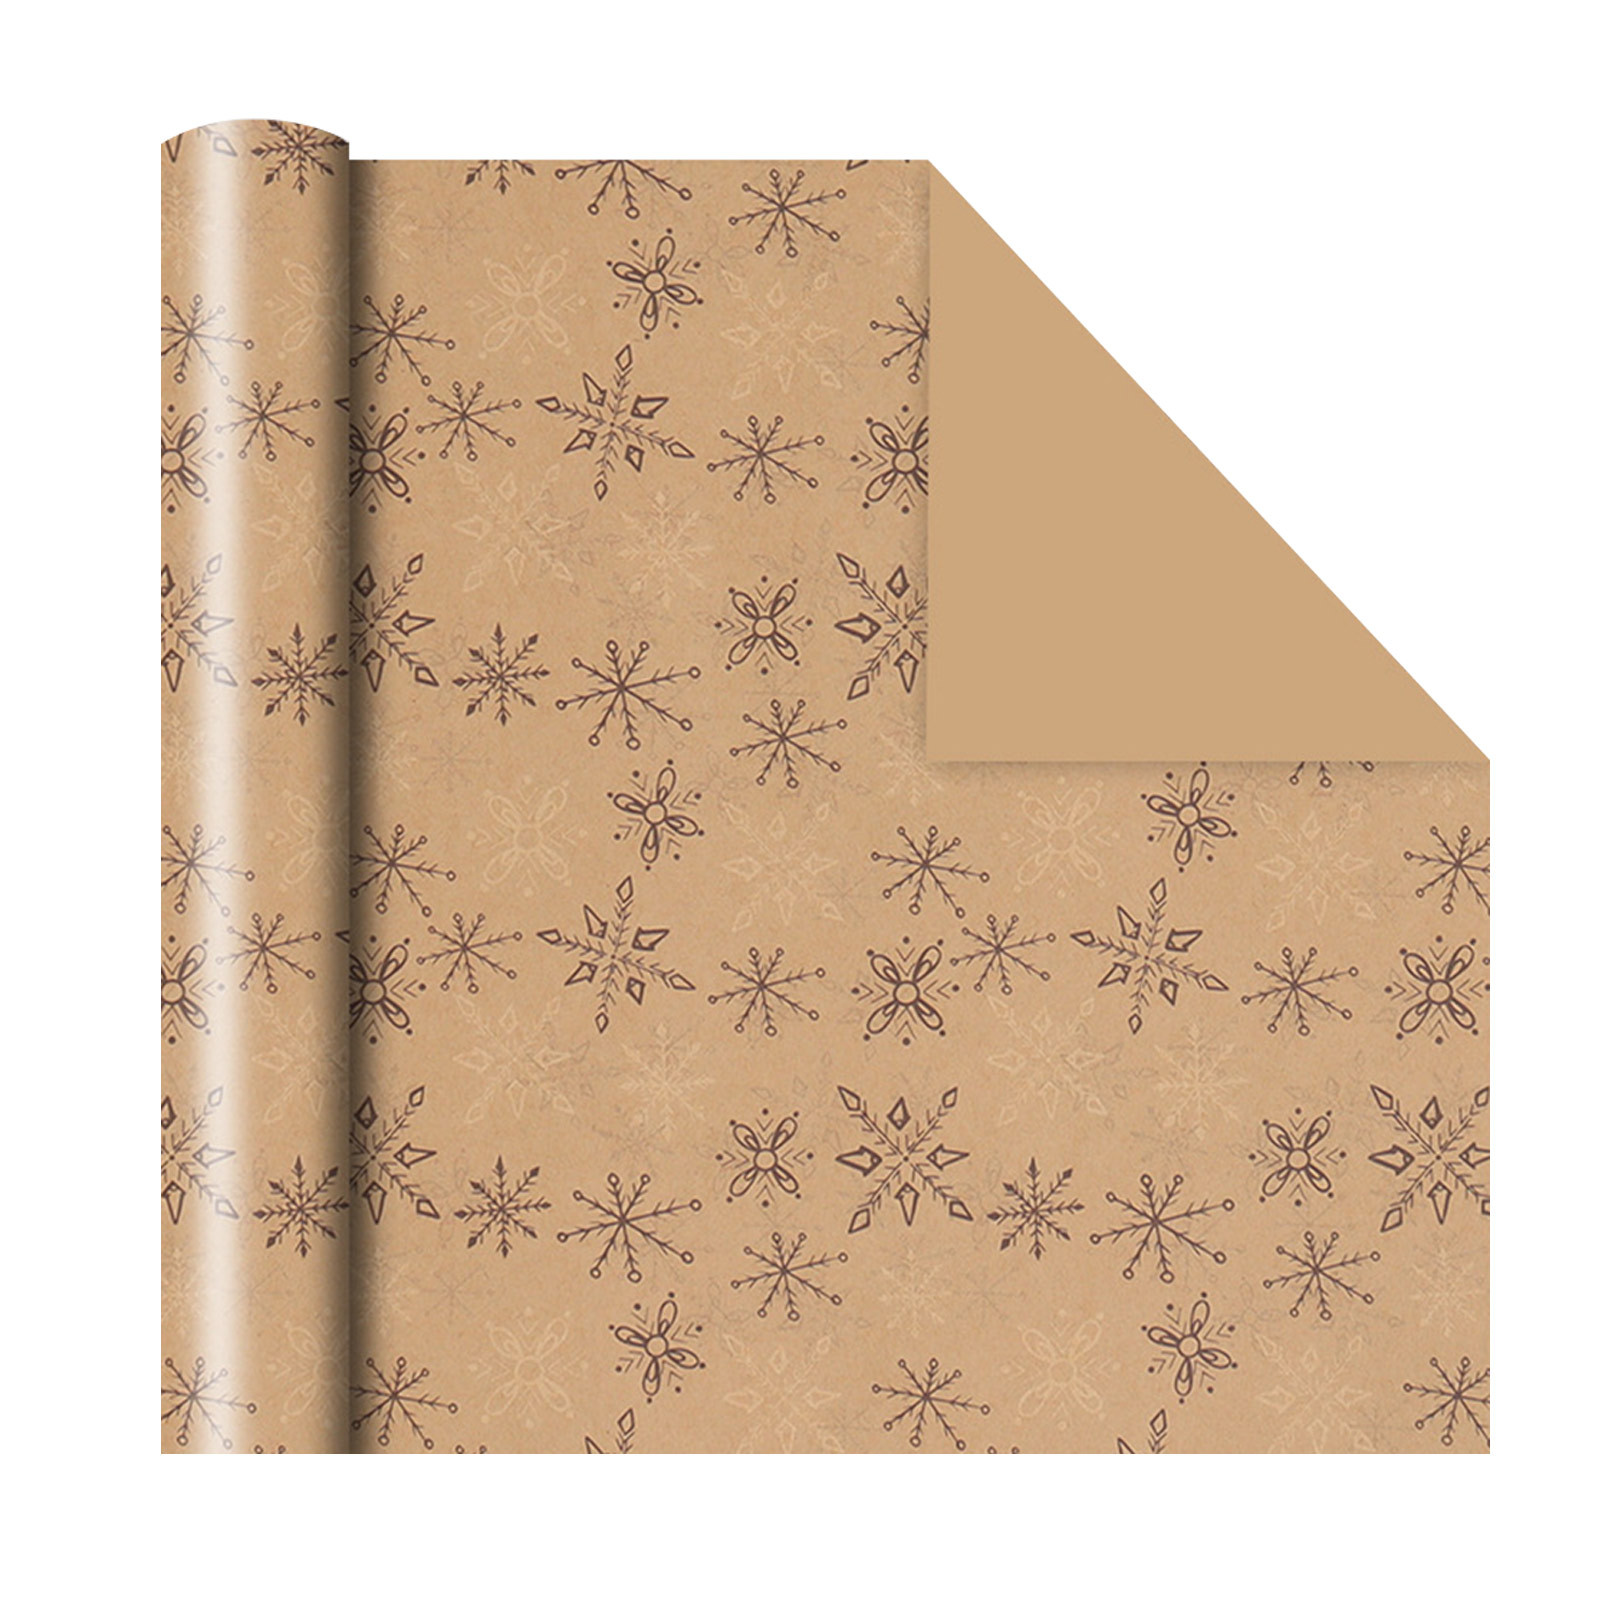 QIIBURR Christmas Tree Wrapping Paper Christmas Gift Paper Gift